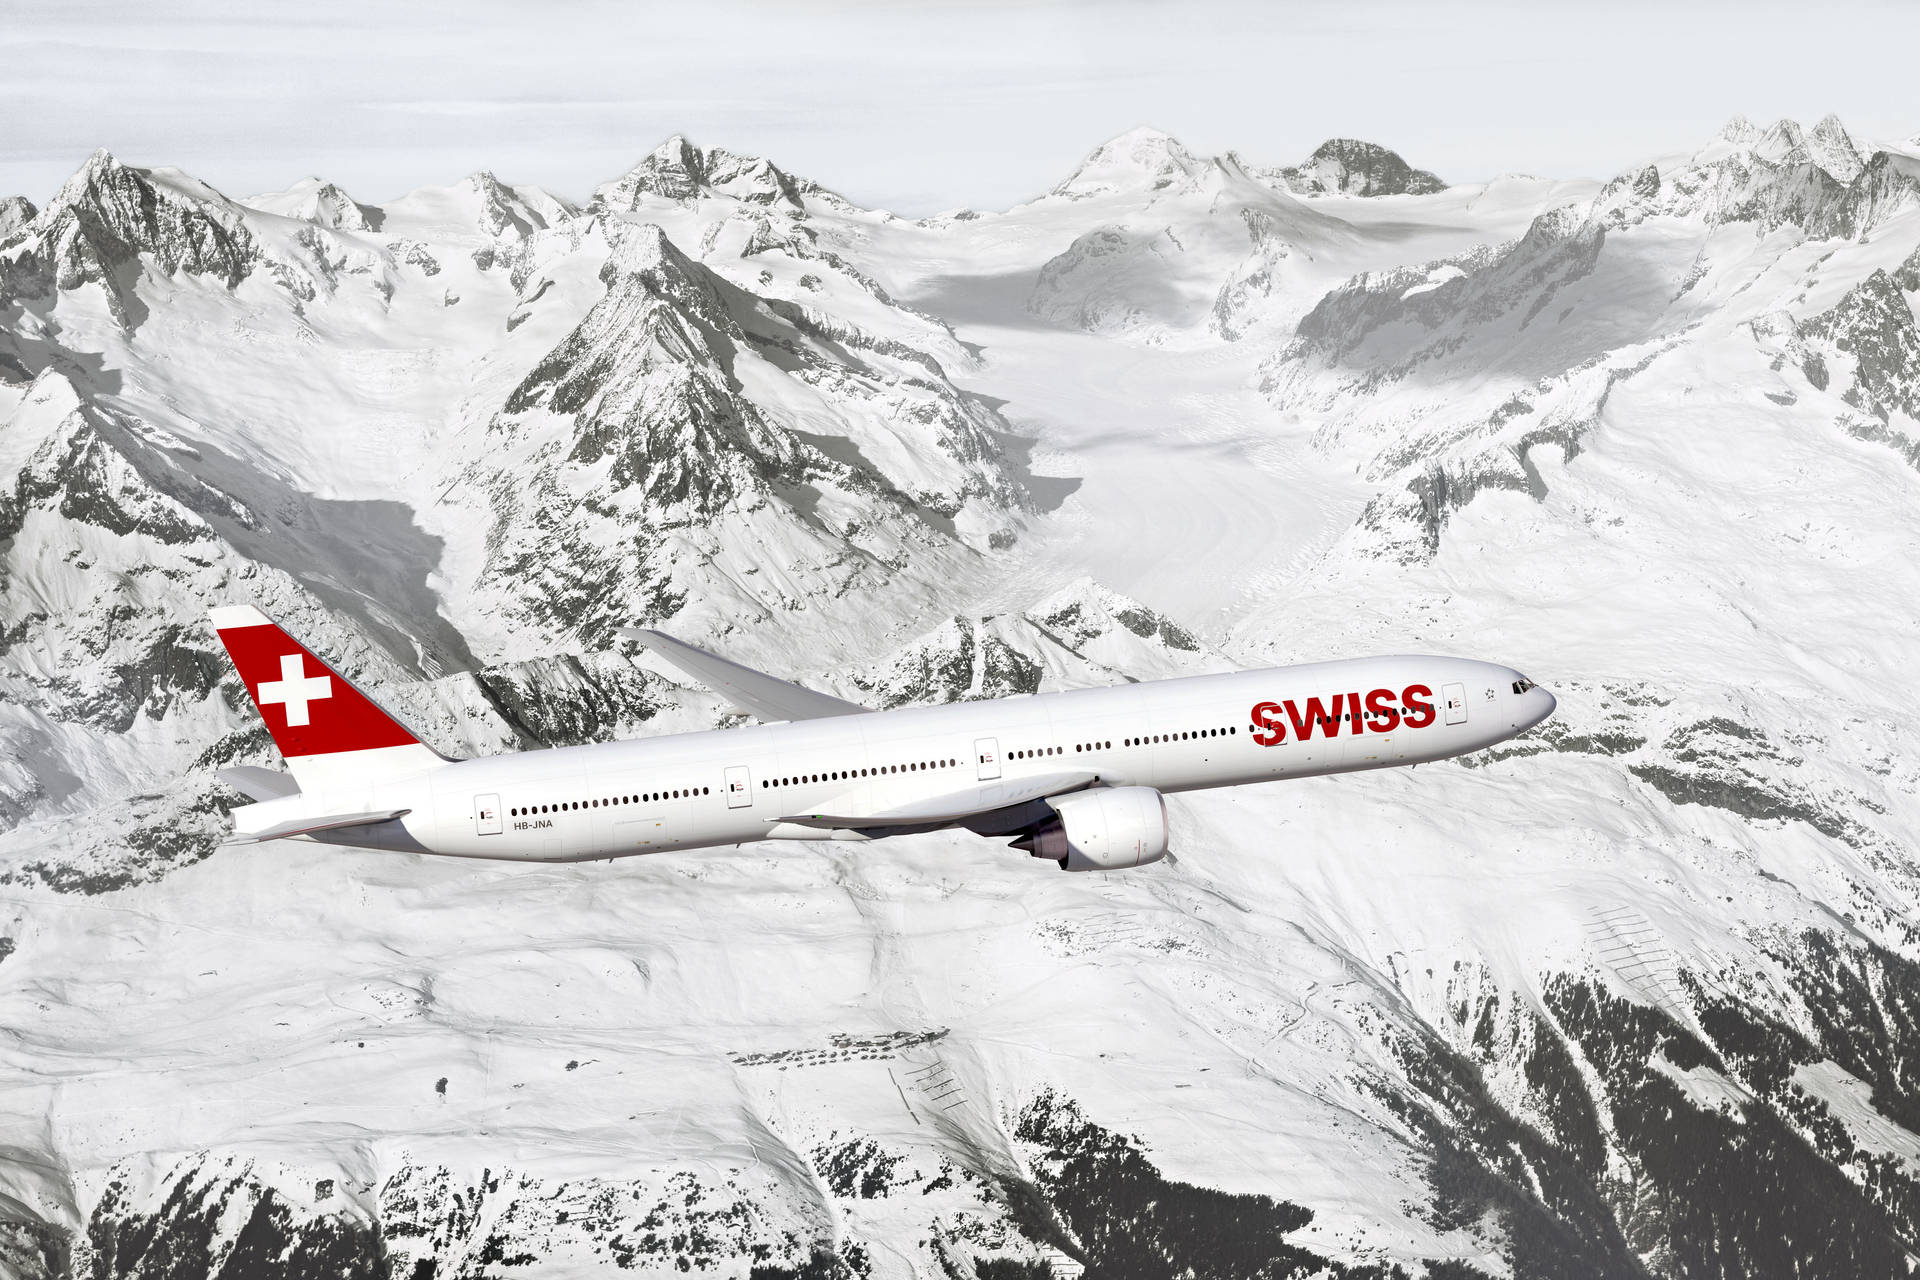 Hd Plane Swiss Airline Background